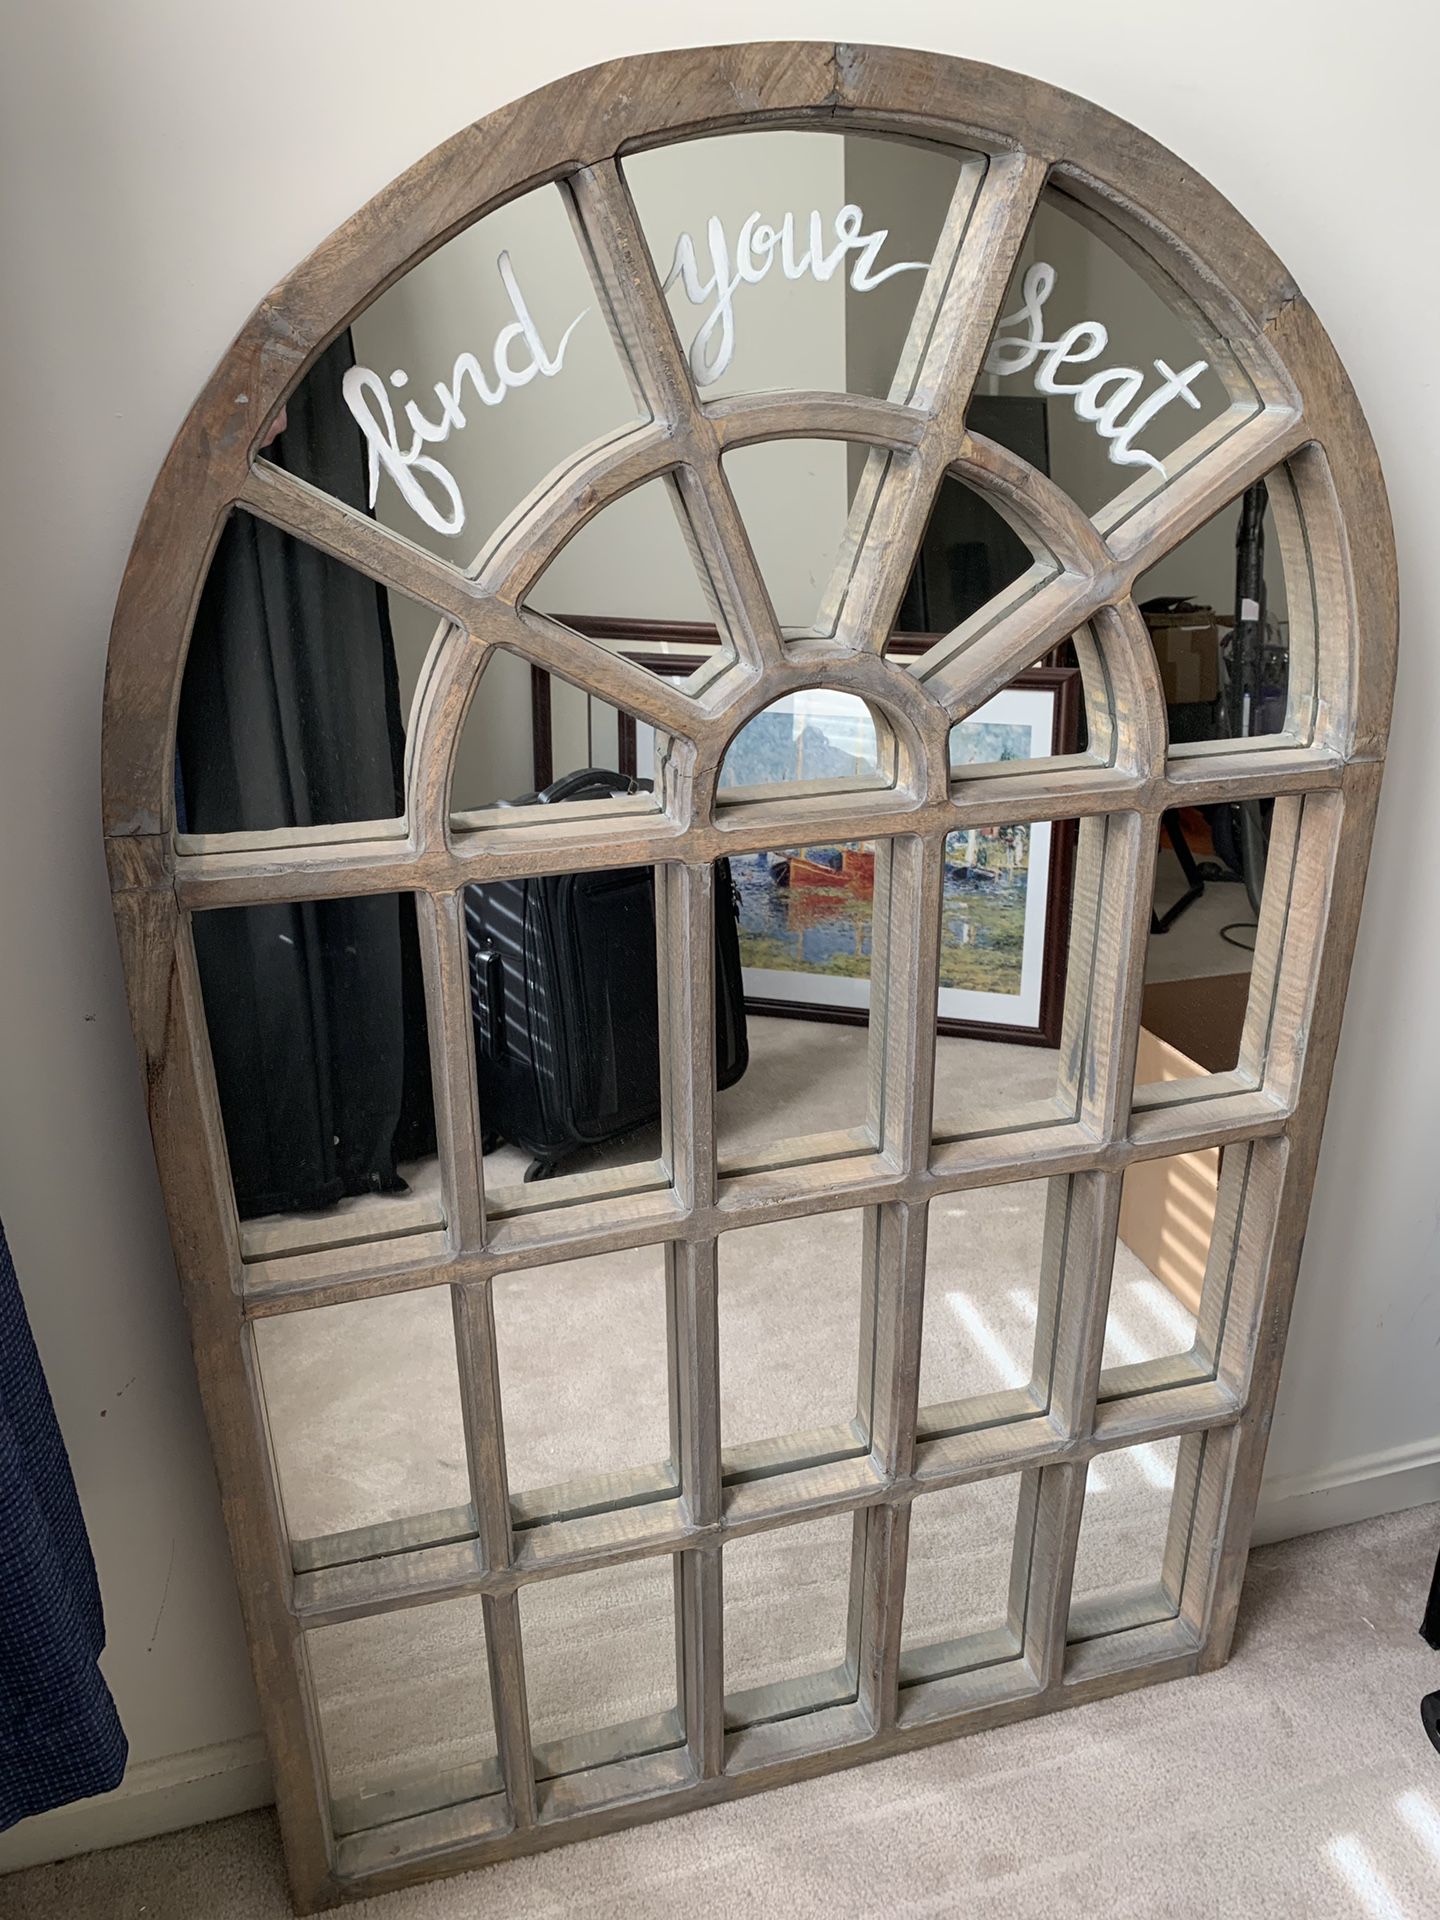 Wedding seating mirror (writing would wash off)